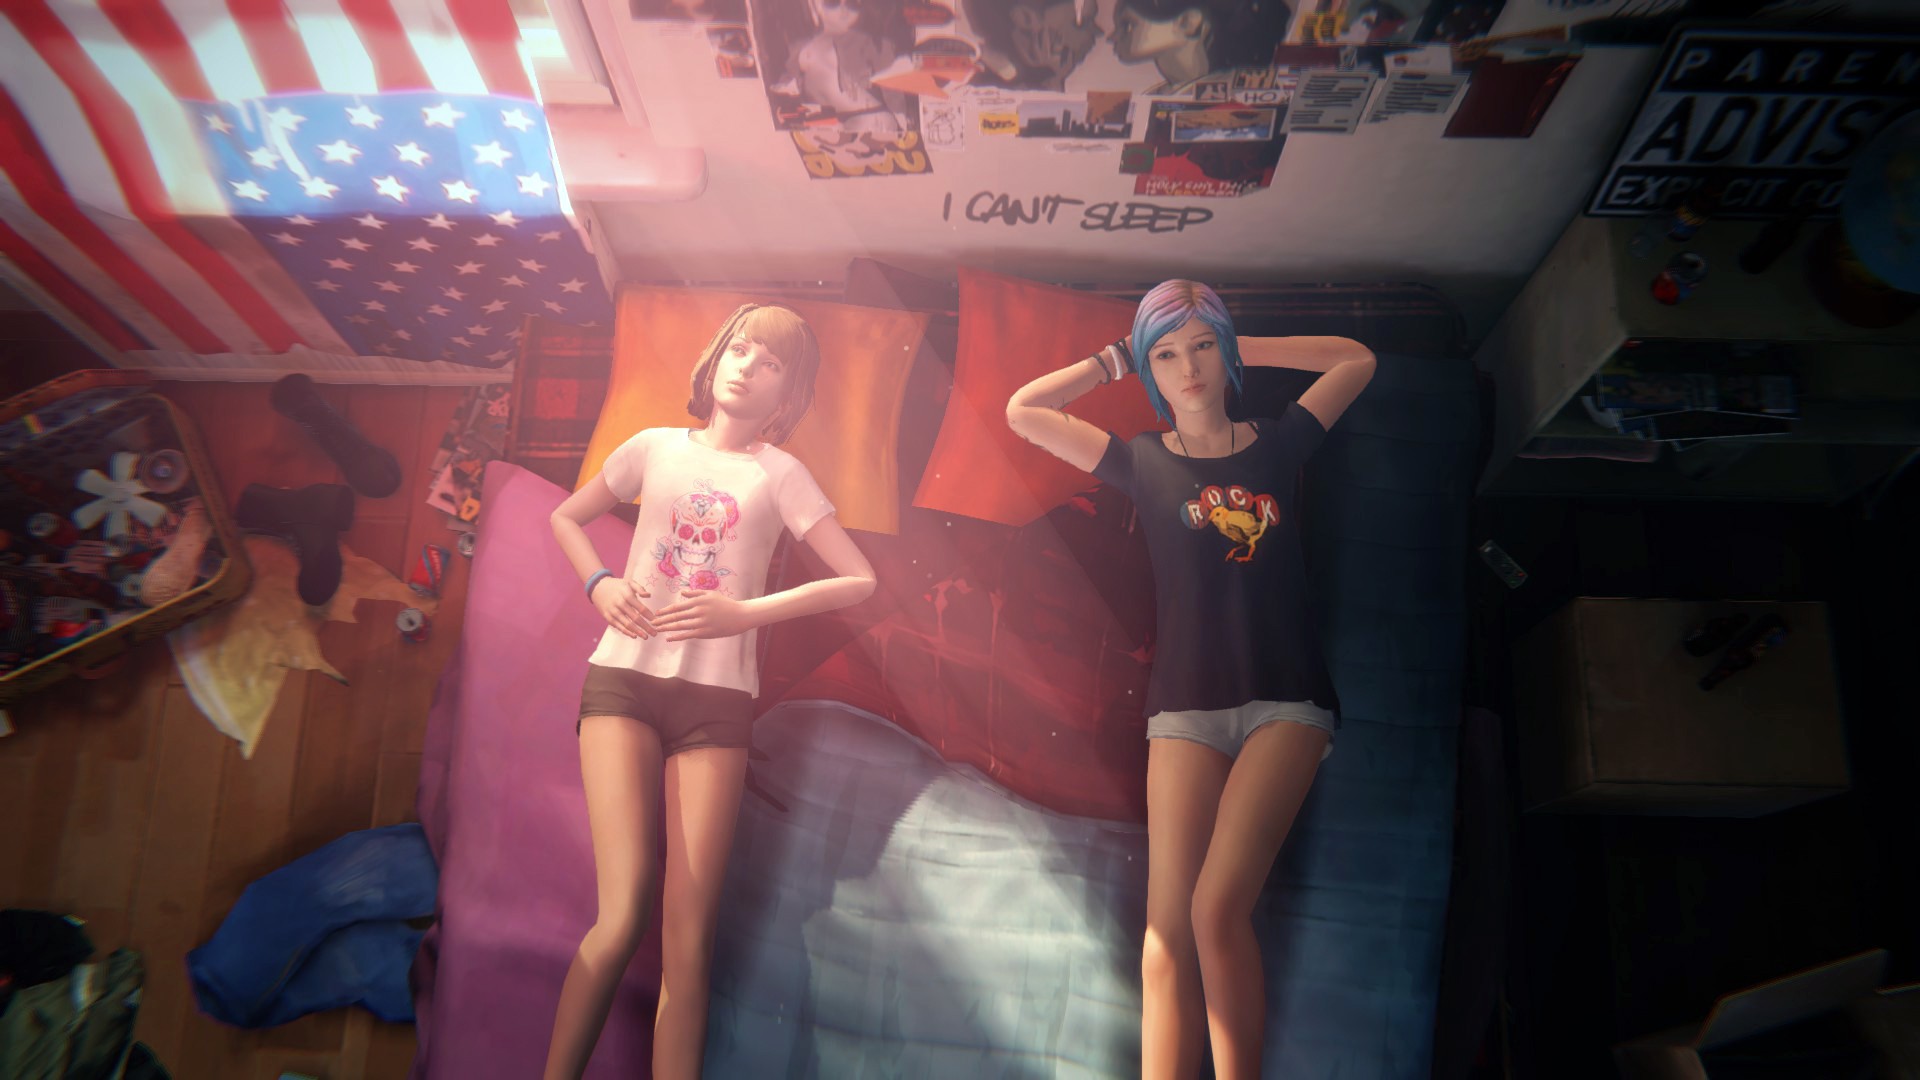 General 1920x1080 Life Is Strange Chloe Price Max Caulfield video games screen shot PC gaming American flag women indoors video game characters video game girls in bed bed interior